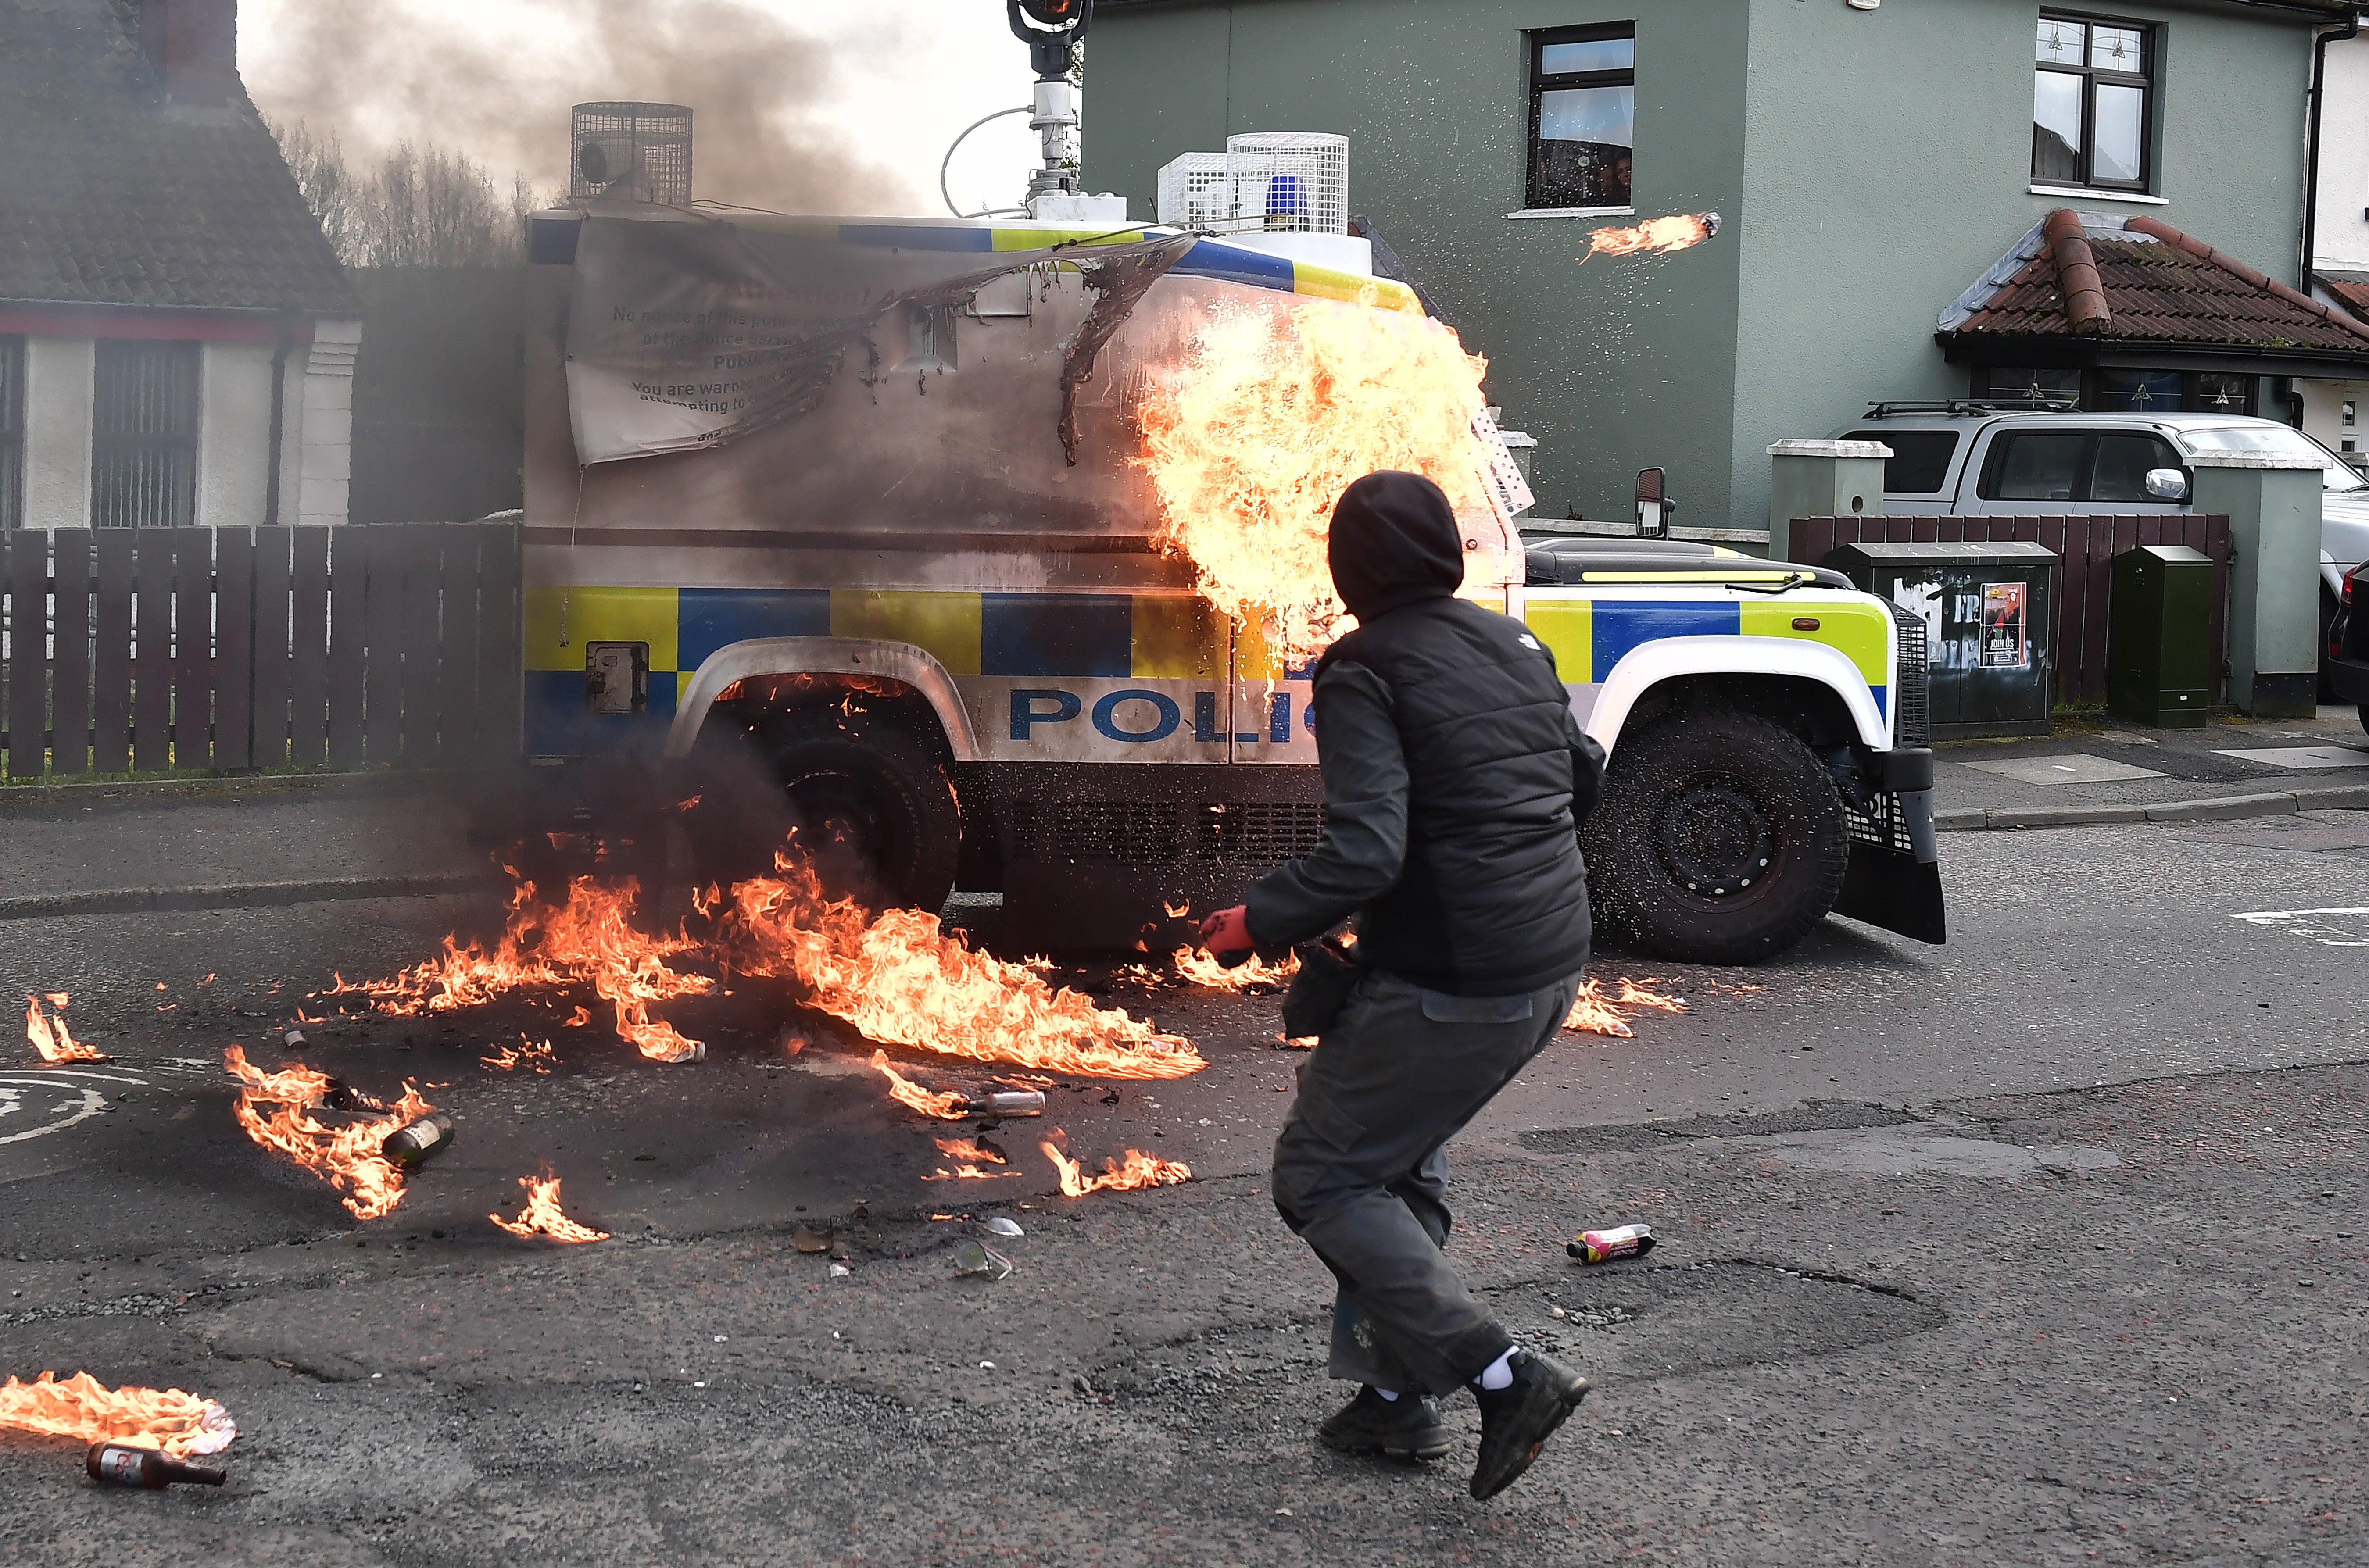 A police vehicle is attacked with petrol bombs during an illegal dissident march in Londonderry in April